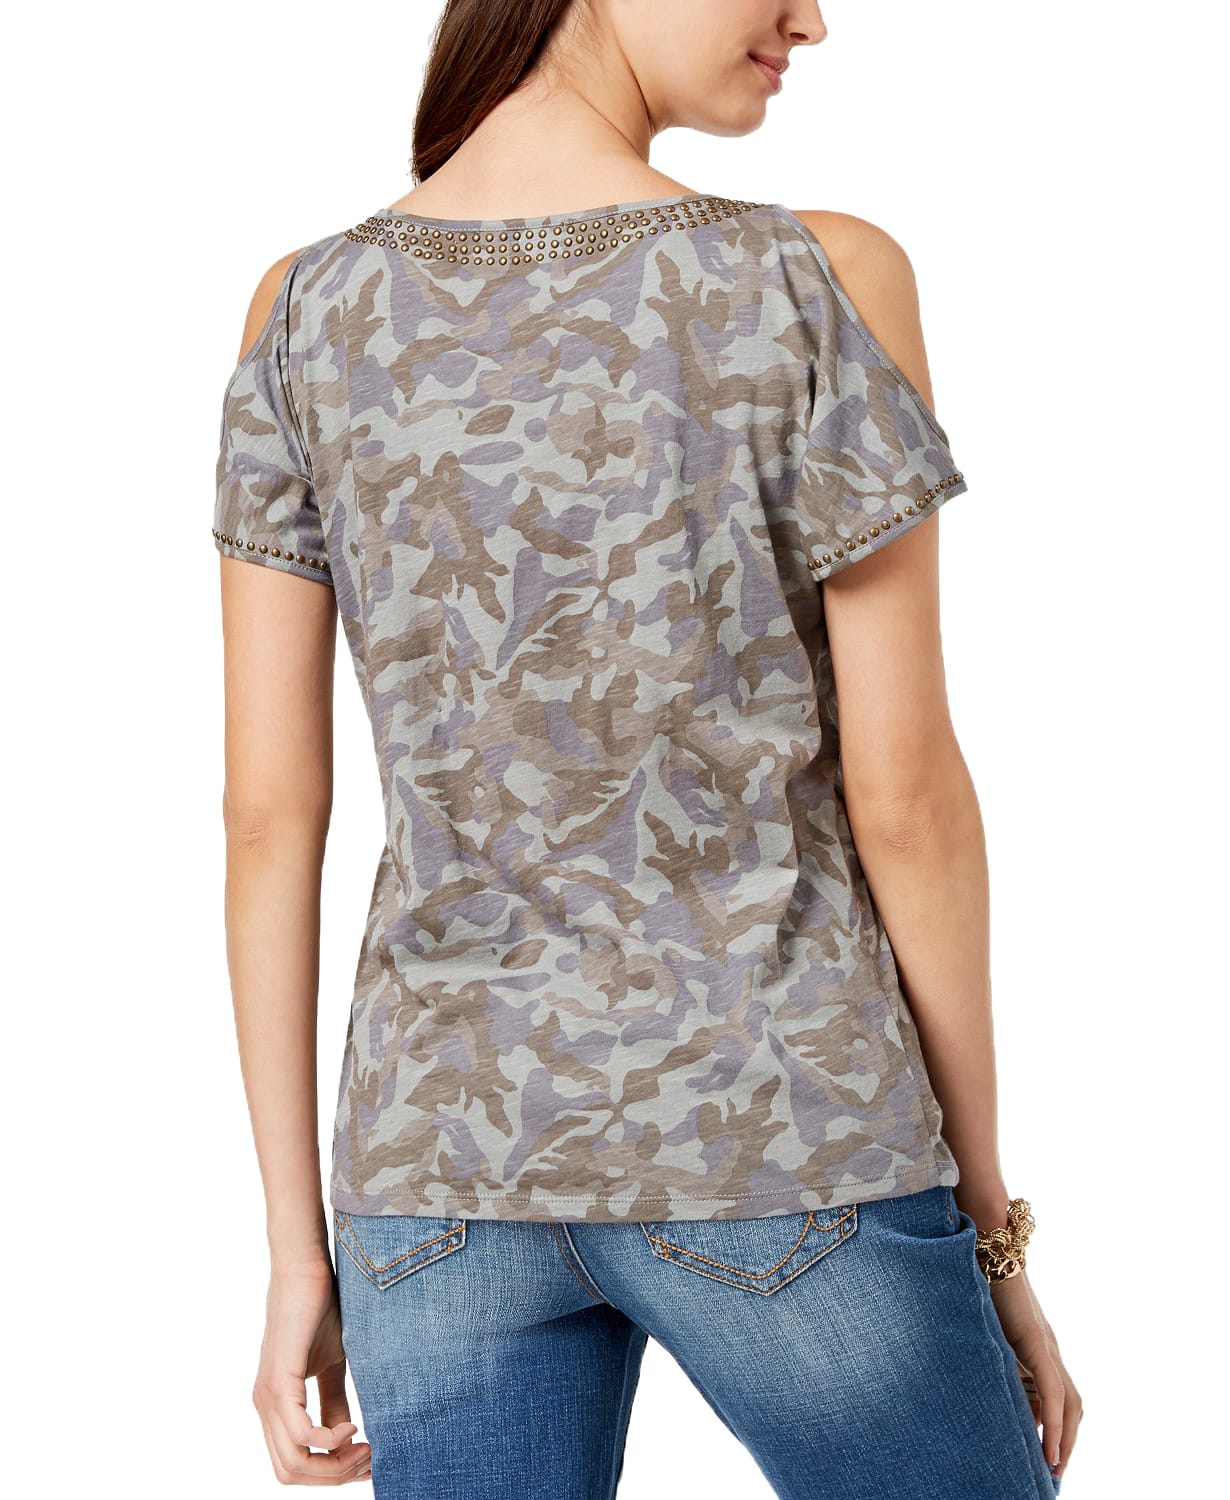 woocommerce-673321-2209615.cloudwaysapps.com-inc-international-concepts-womens-green-camouflage-cold-shoulder-t-shirt